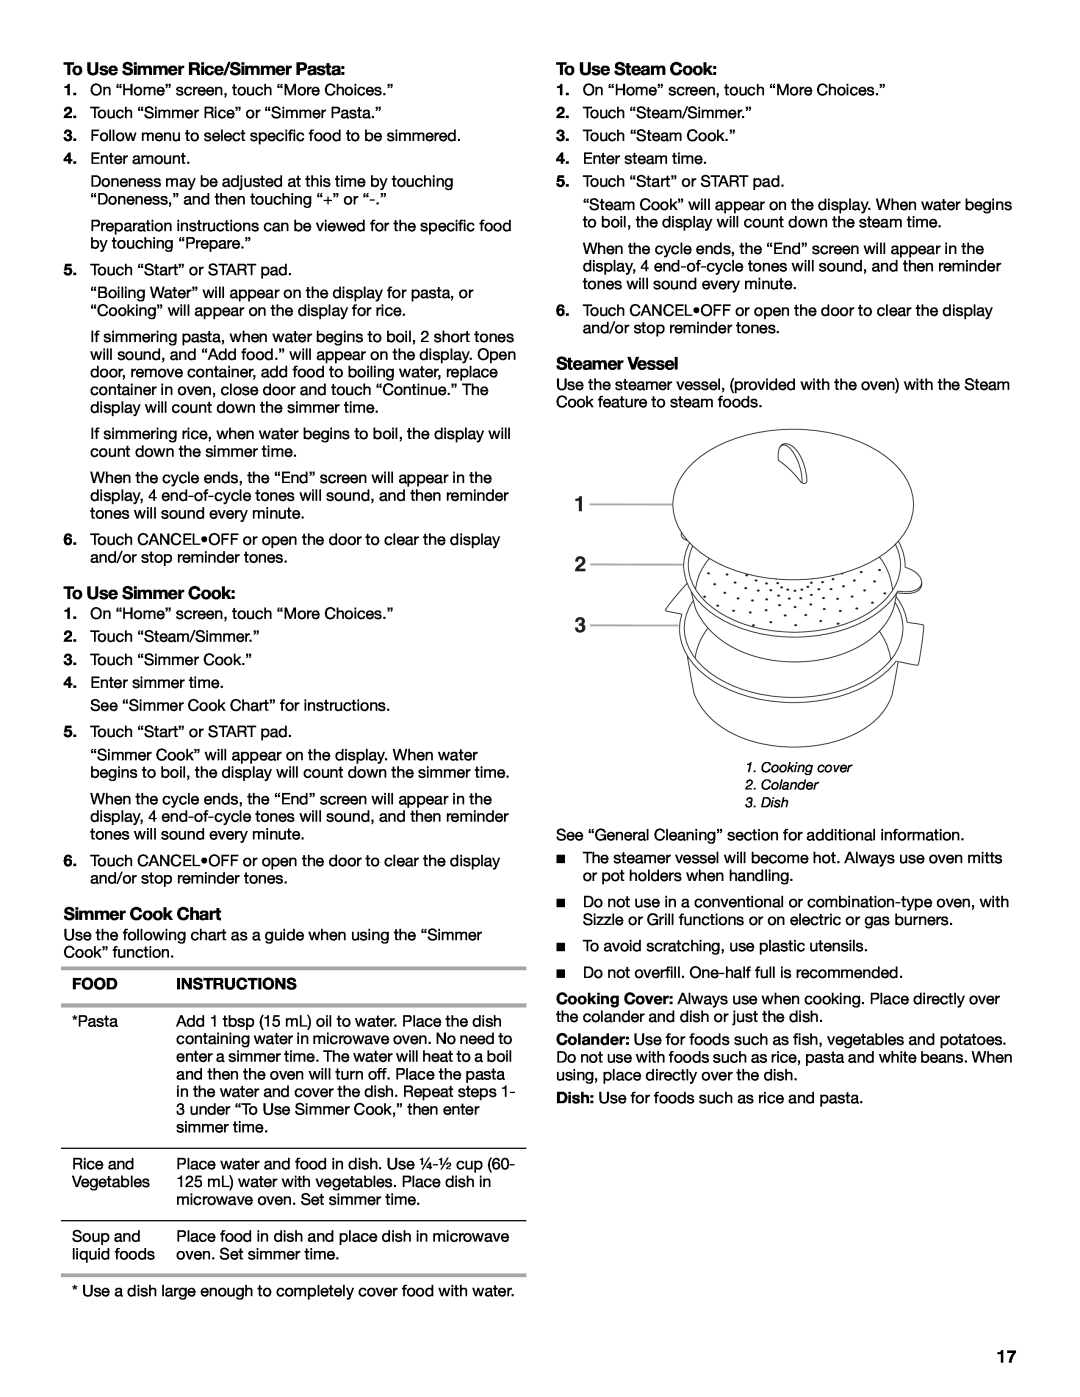 Whirlpool GH9177XL manual To Use Simmer Rice/Simmer Pasta, To Use Simmer Cook, Simmer Cook Chart, To Use Steam Cook 